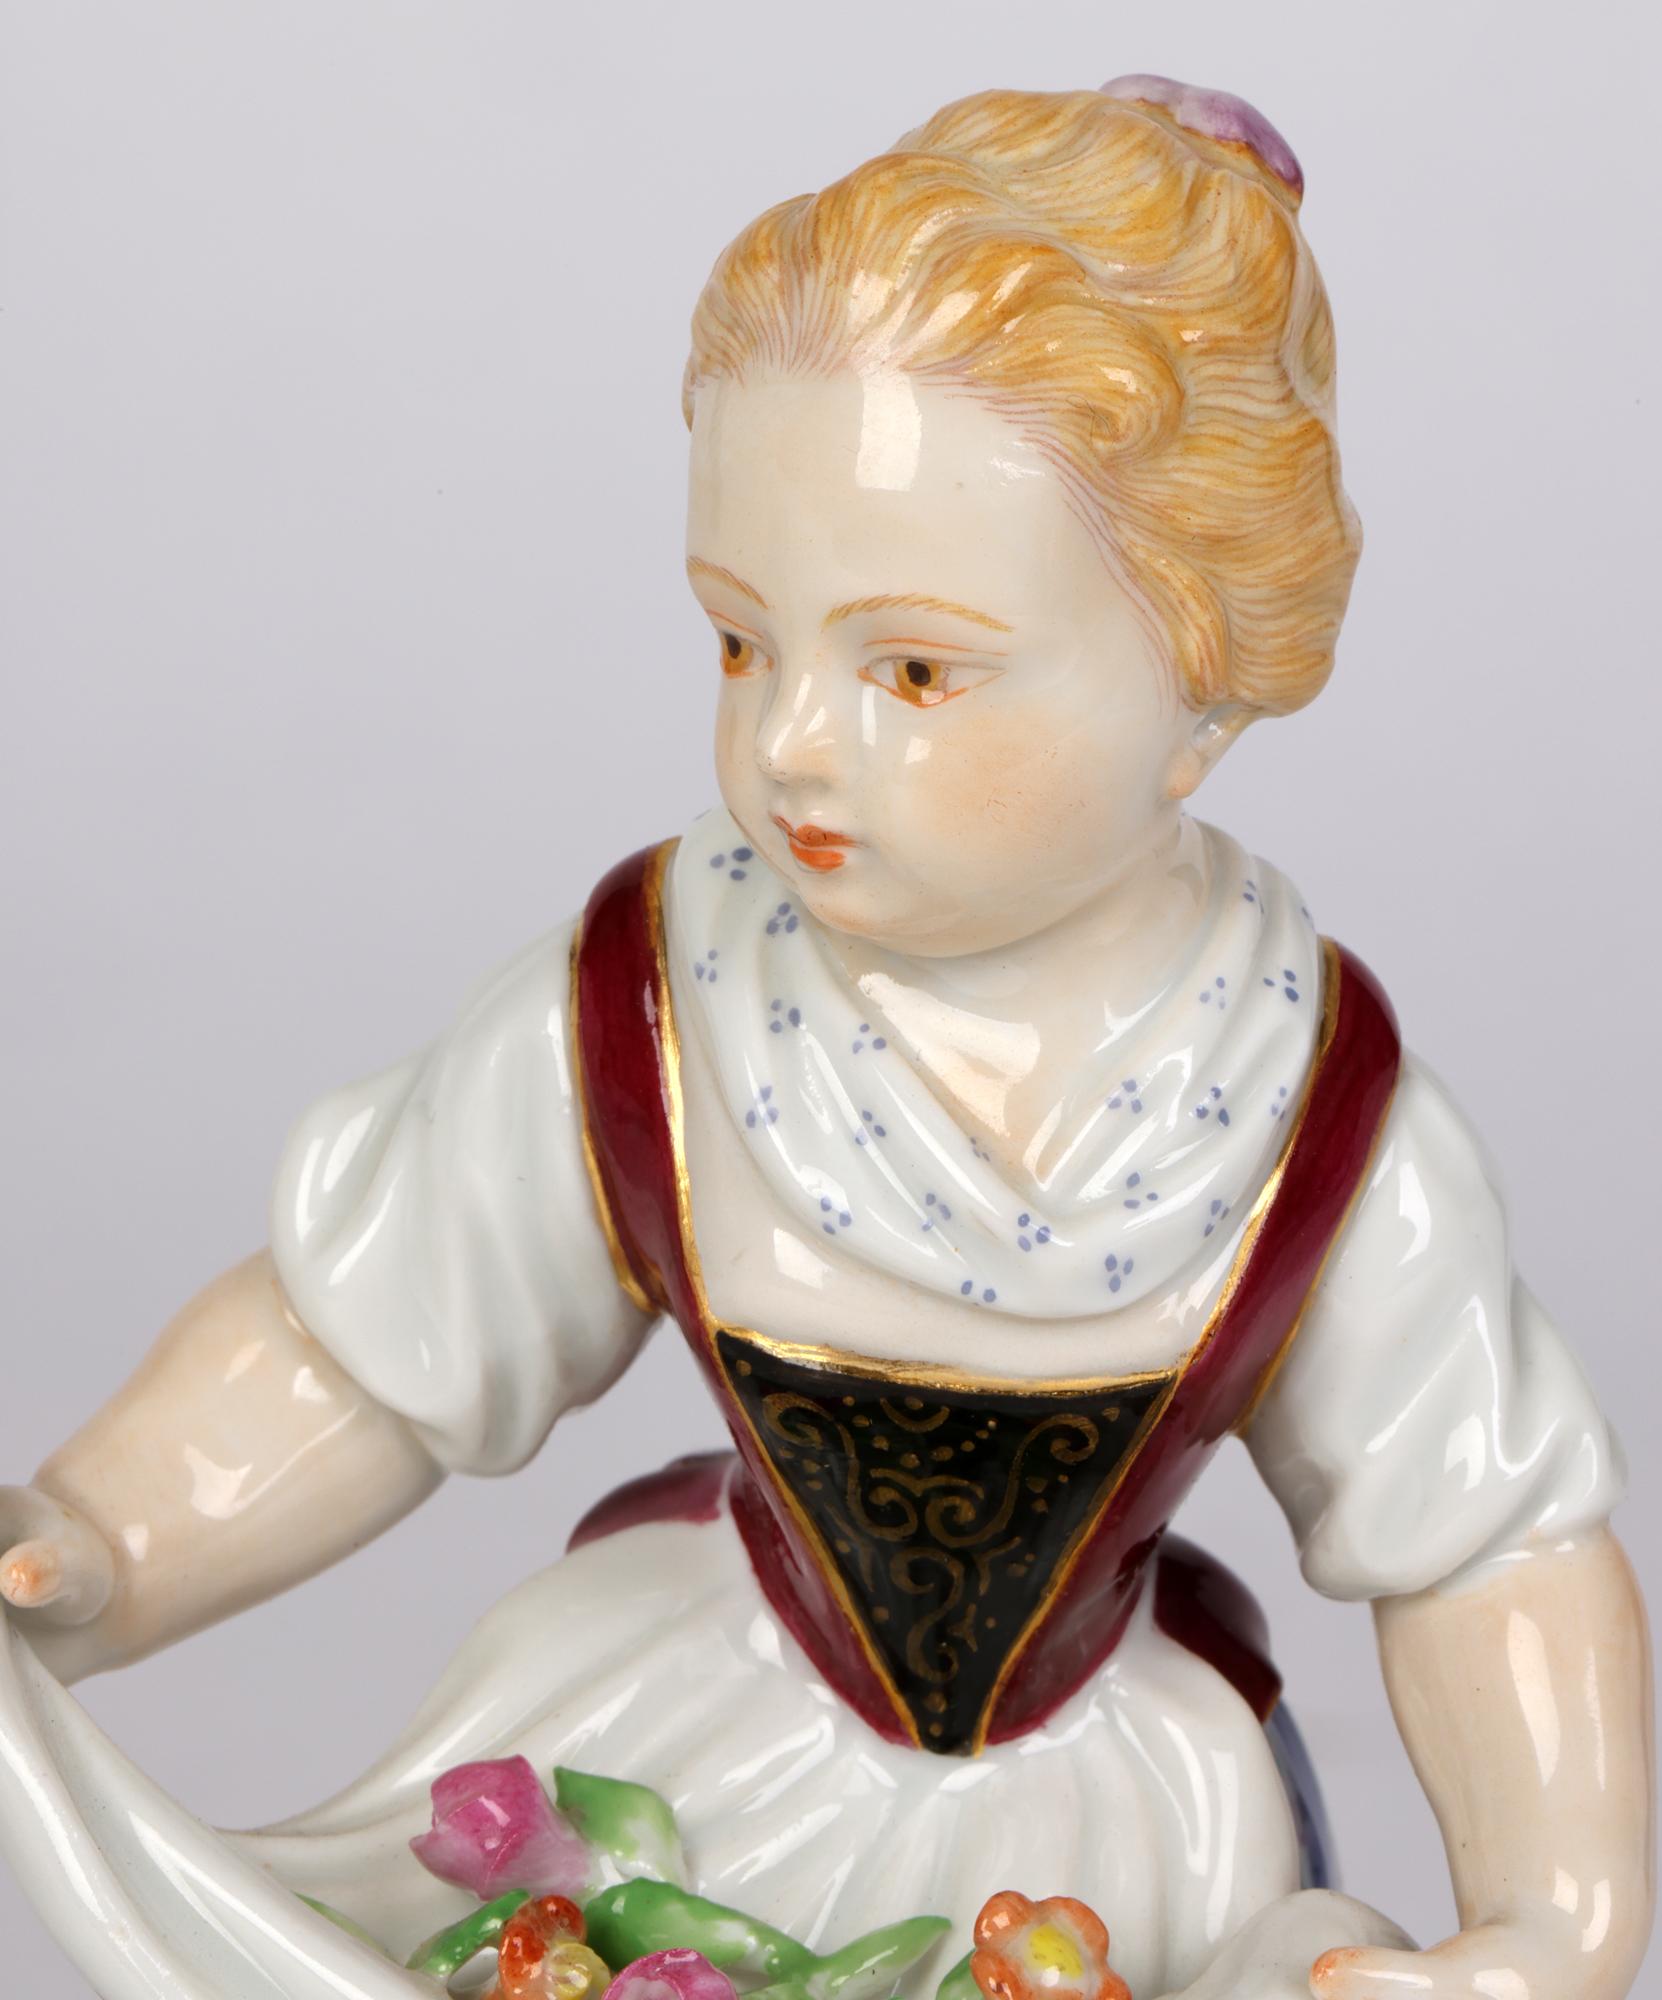 A fine quality pair antique Meissen porcelain figures of children with flowers dating from the latter 19th or early 20th century. Both figures stand raised on a scroll work rounded base decorated with gilded and floral designs and comprise of a you